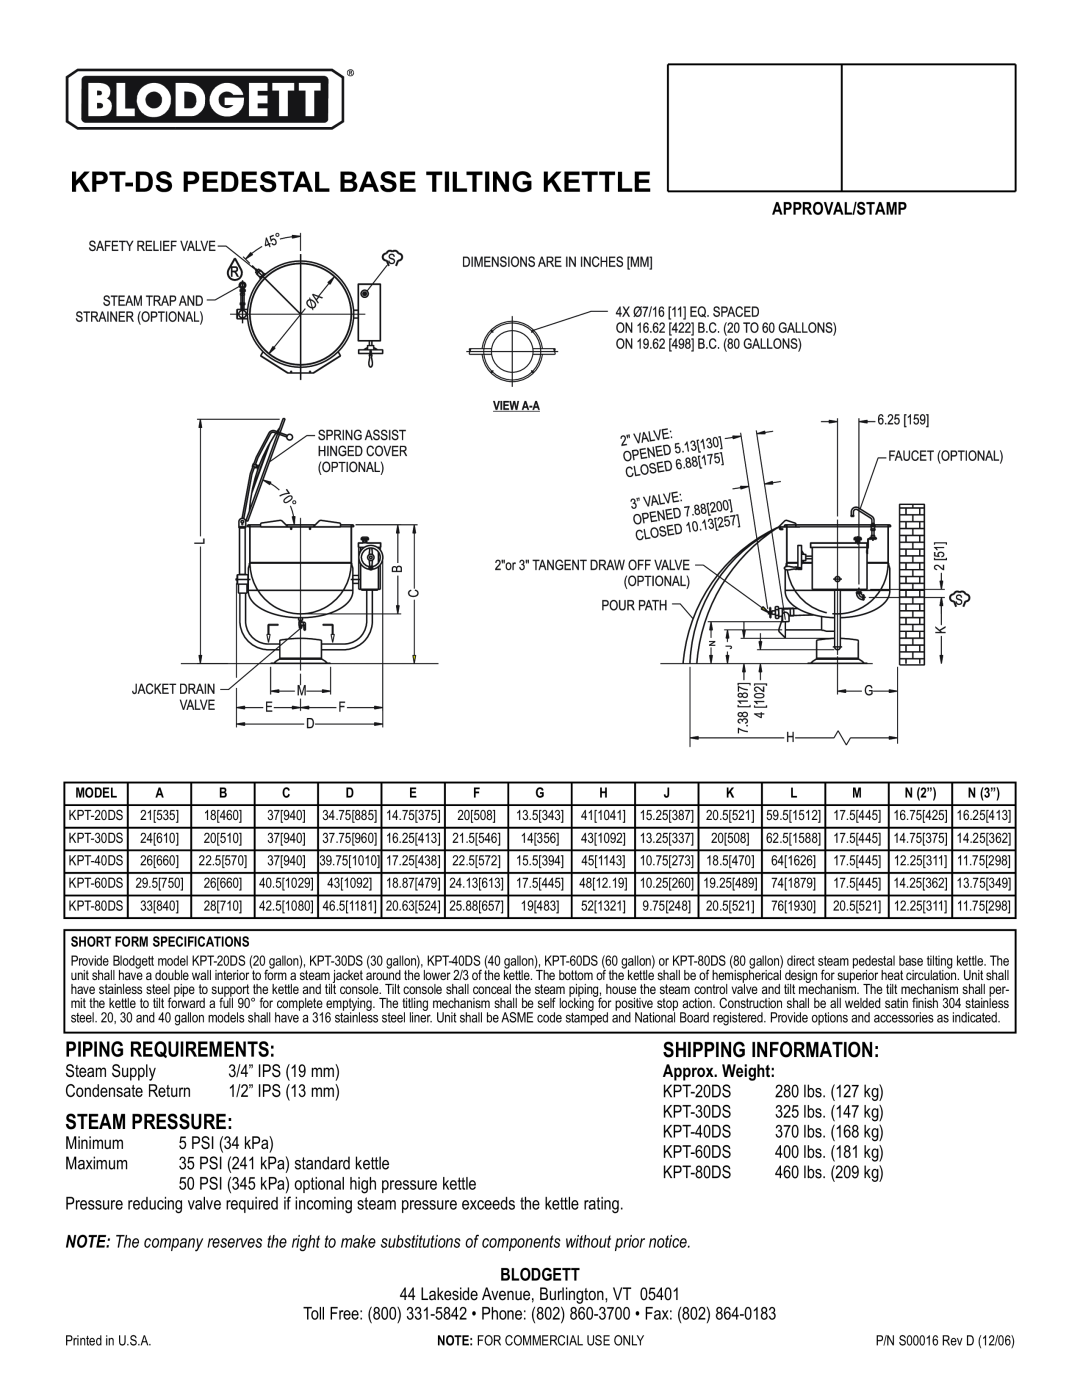 Blodgett KPT-20DS Piping Requirements, Steam Pressure, Shipping Information, Approval/Stamp, Approx. Weight, Blodgett 